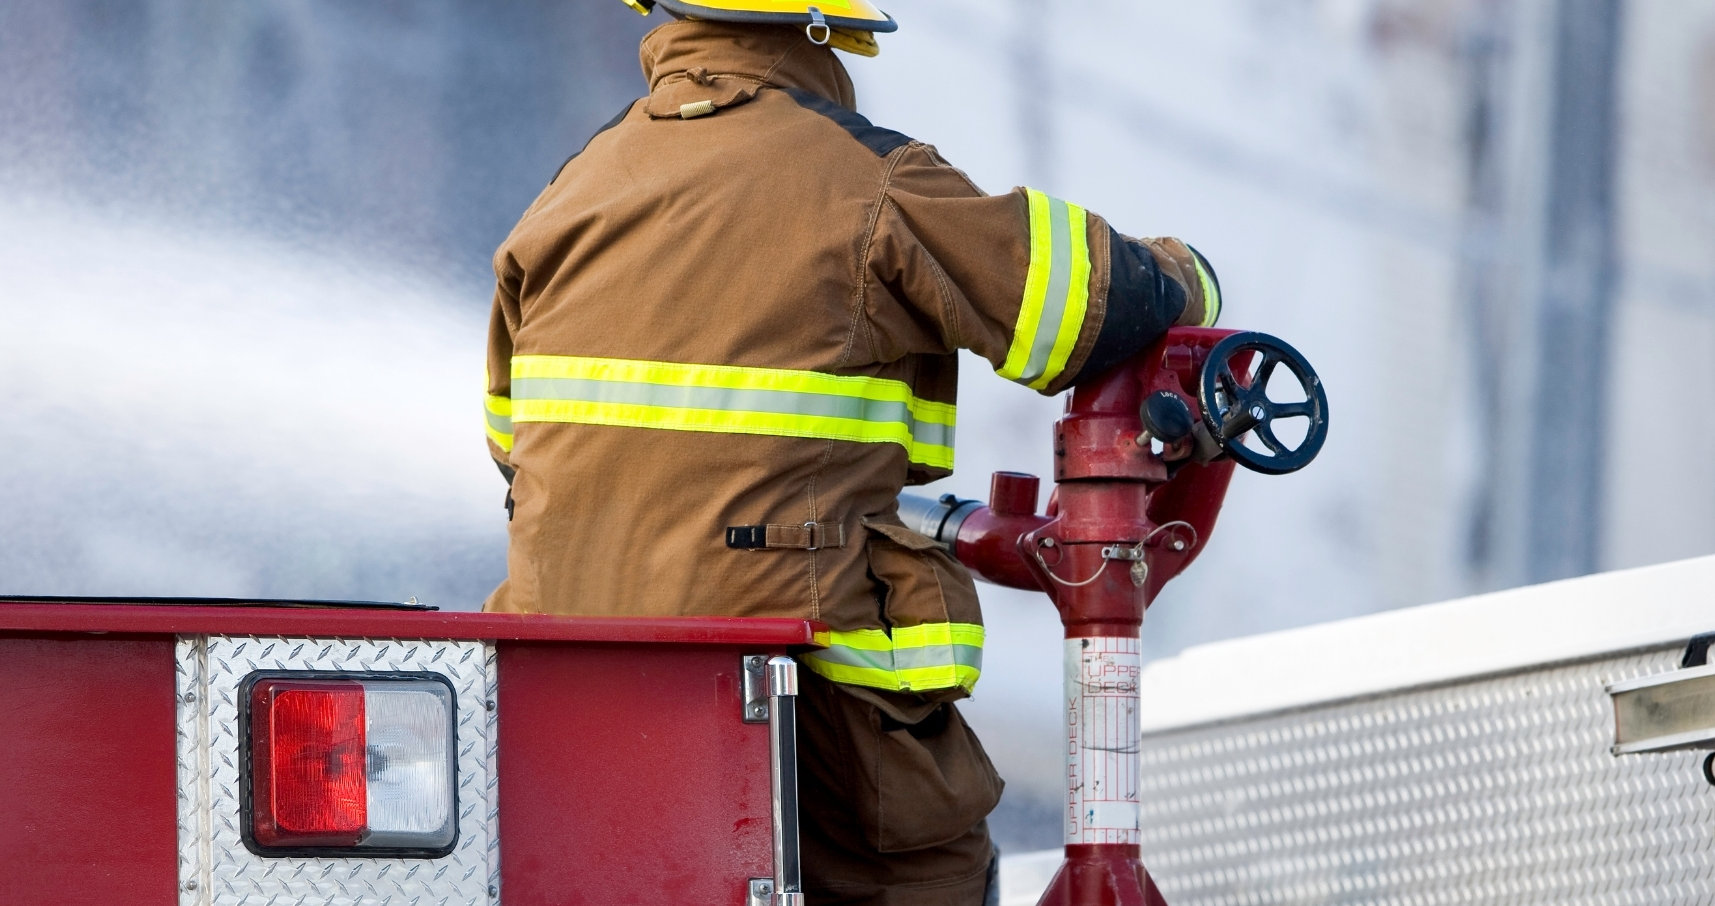 A firefighter on a truck spraying out a fire